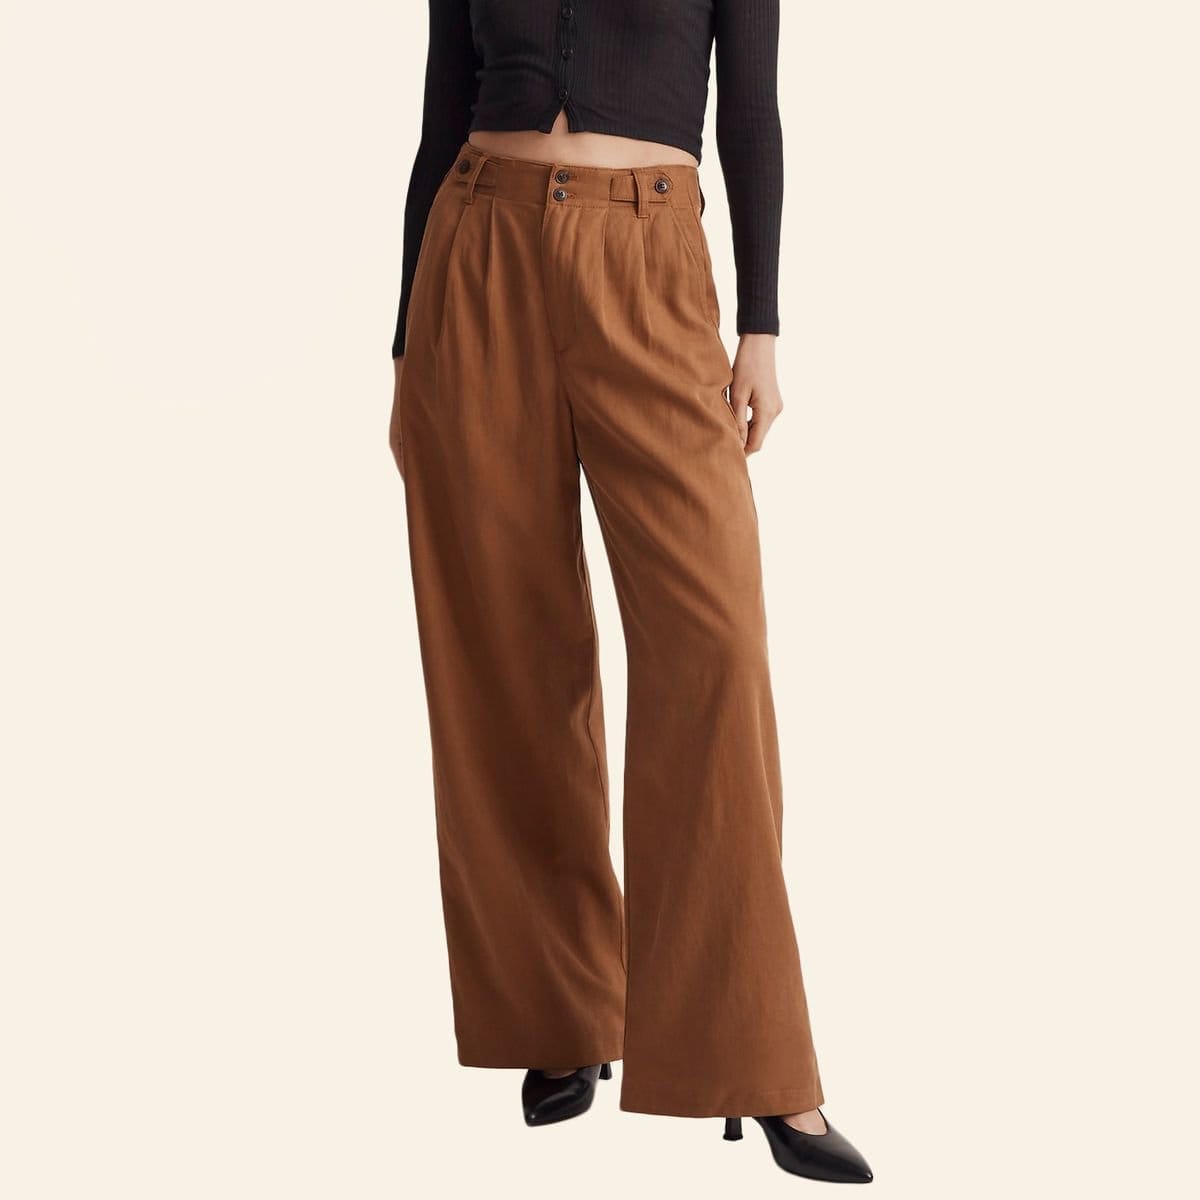 These Tailored Pants Are So Good, I Bought Them in Multiple Colors